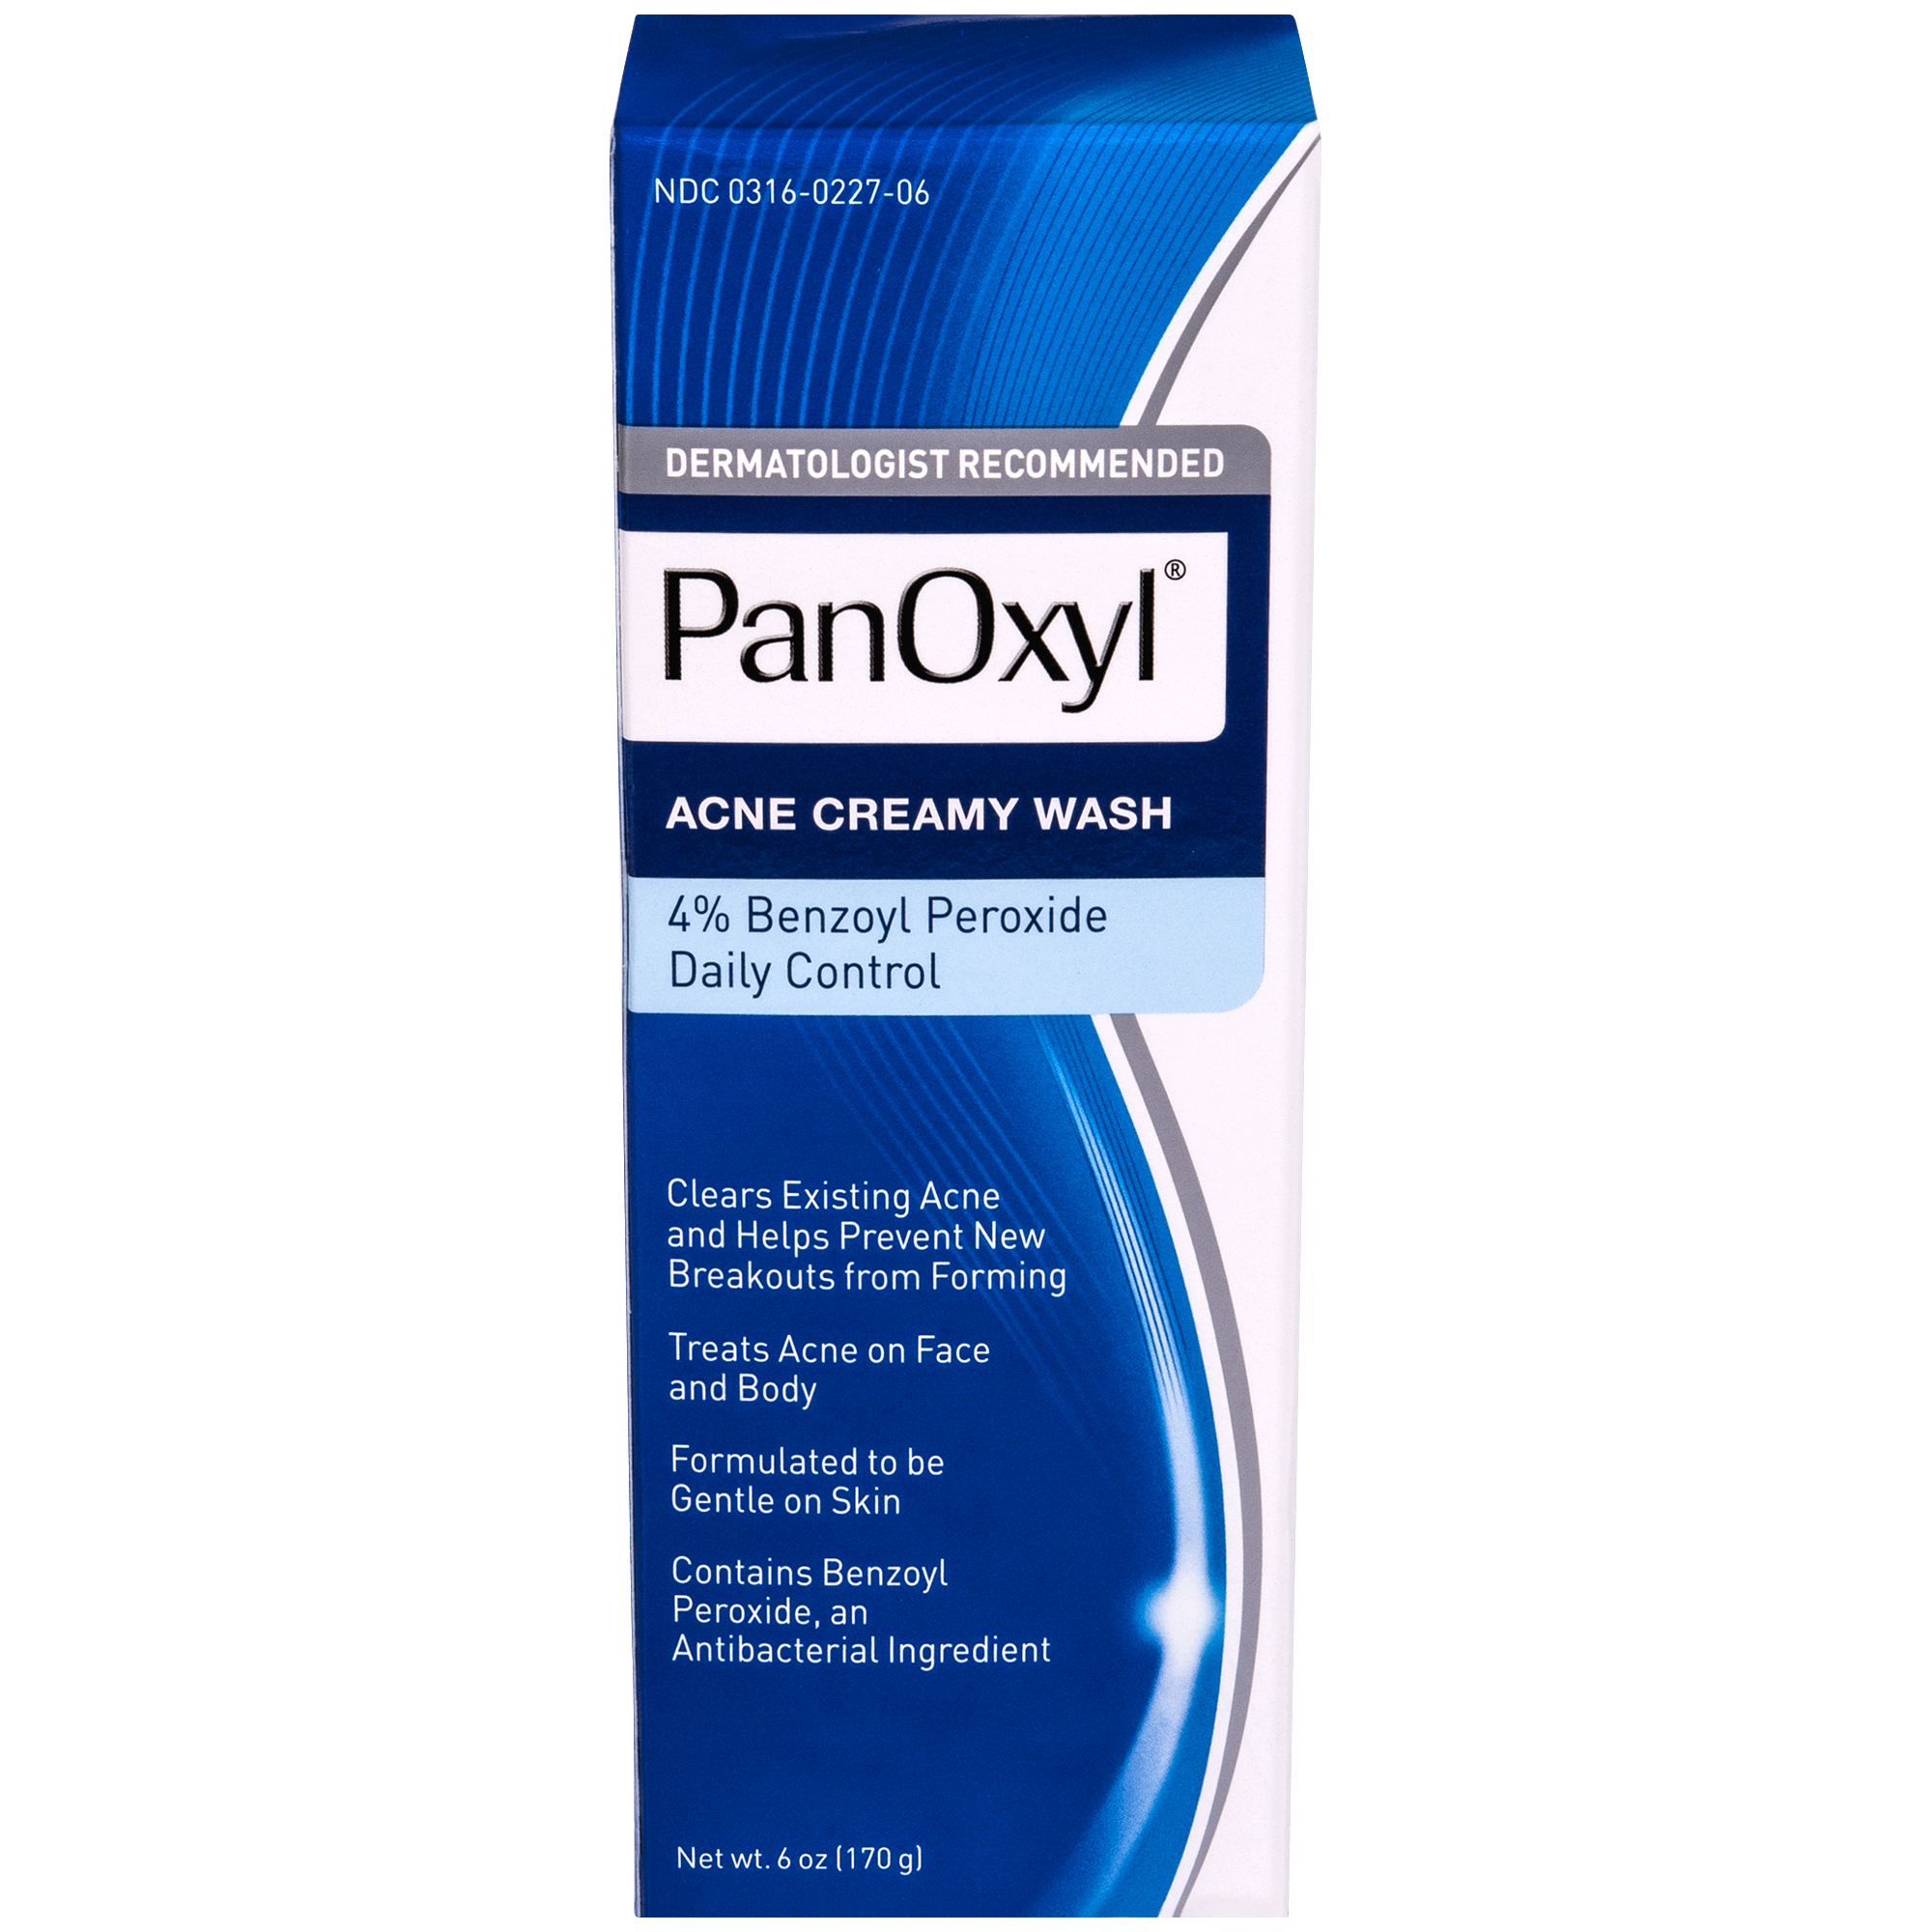 PanOxyl Acne Creamy Wash Daily Control, Face & Body, 4% Benzoyl Peroxide, All Skin Types, 6 oz - image 3 of 13